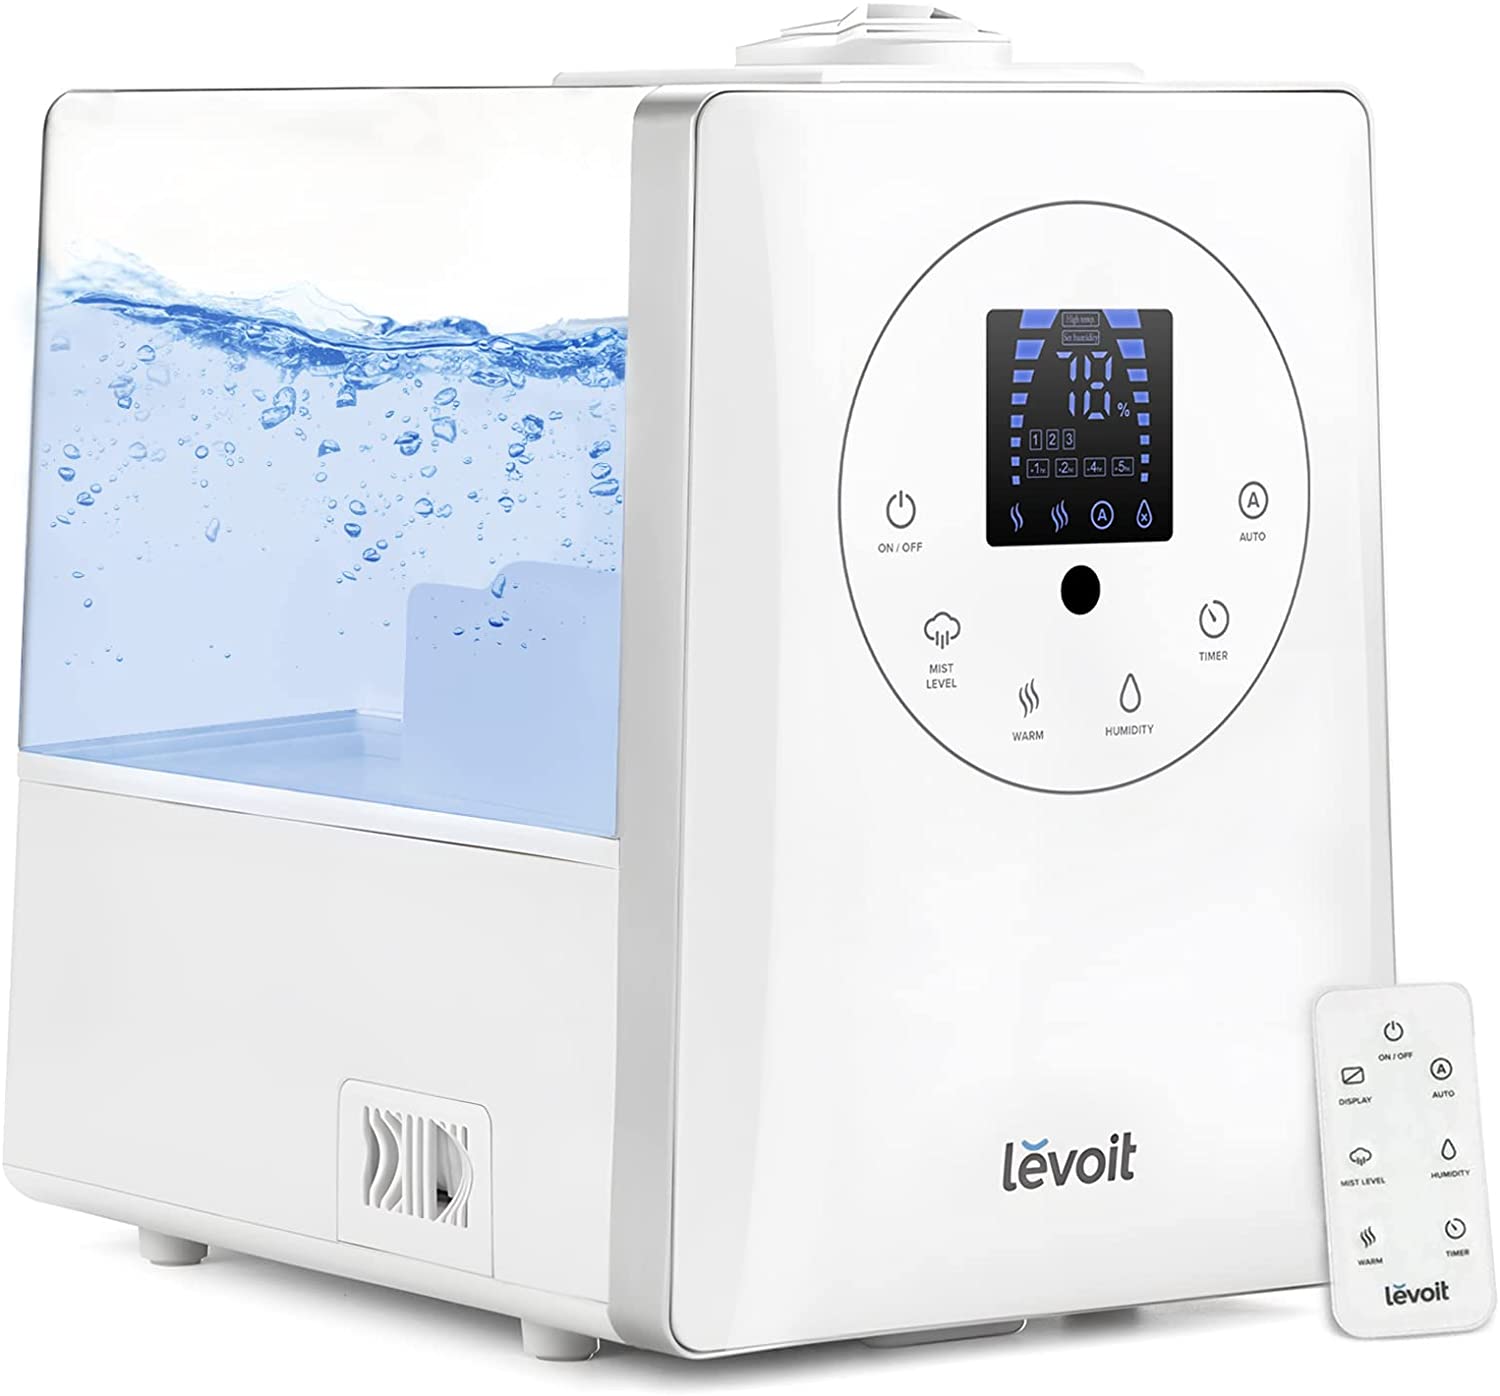 Levoit 6L 753 sq ft Warm and Cool Mist Humidifier, Vaporizer, White - image 13 of 13